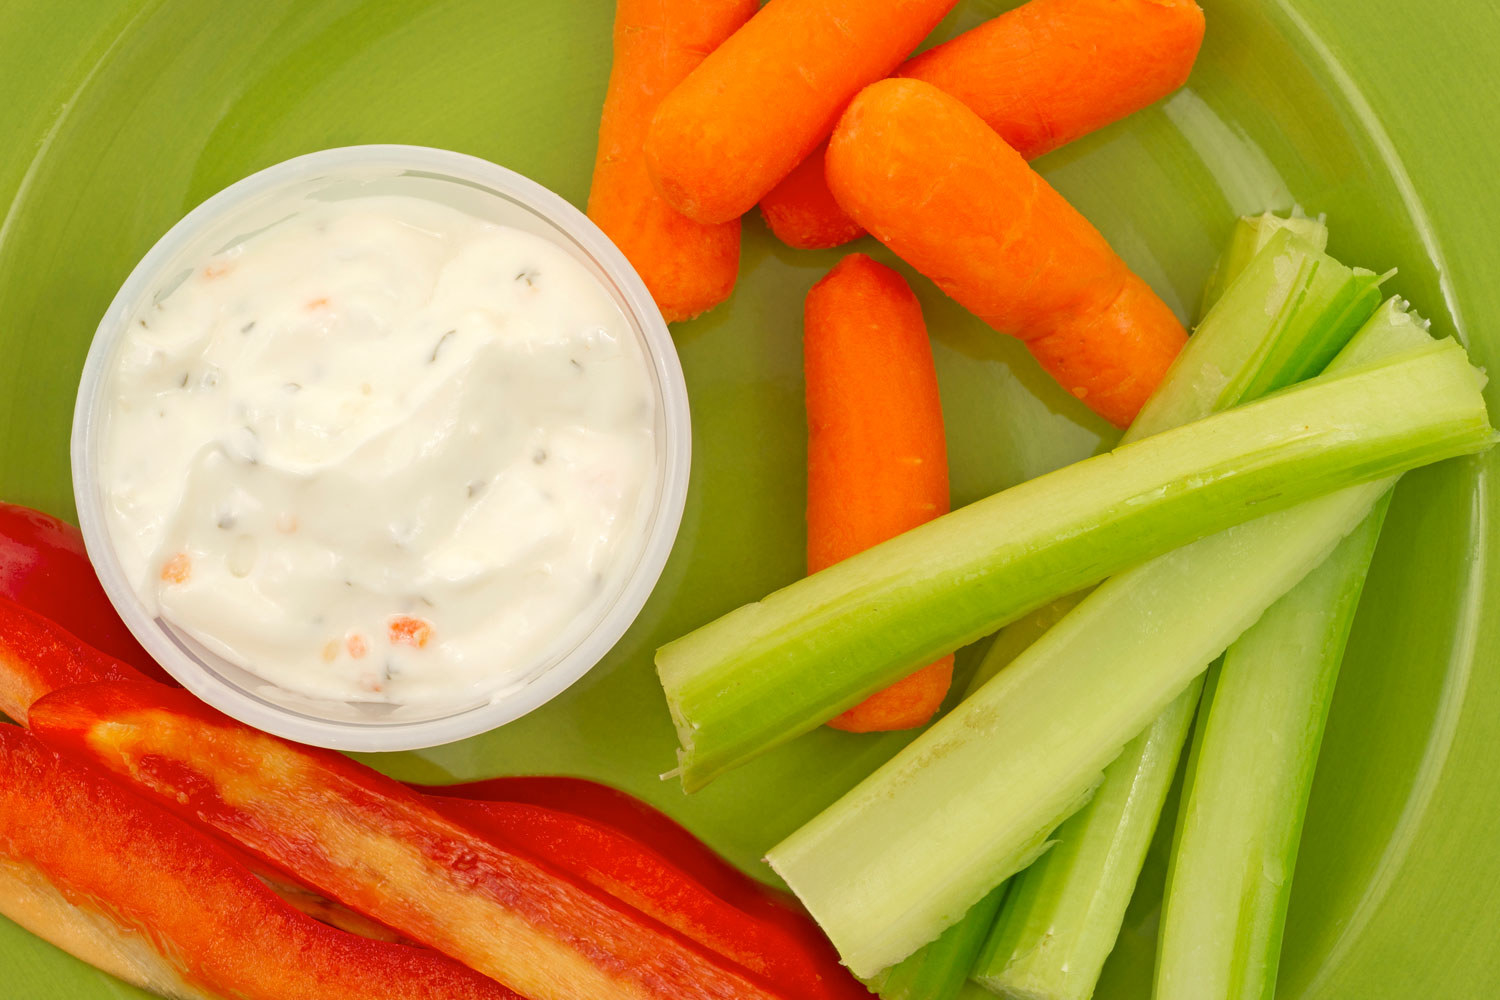 Ranch dressing and vegetables.